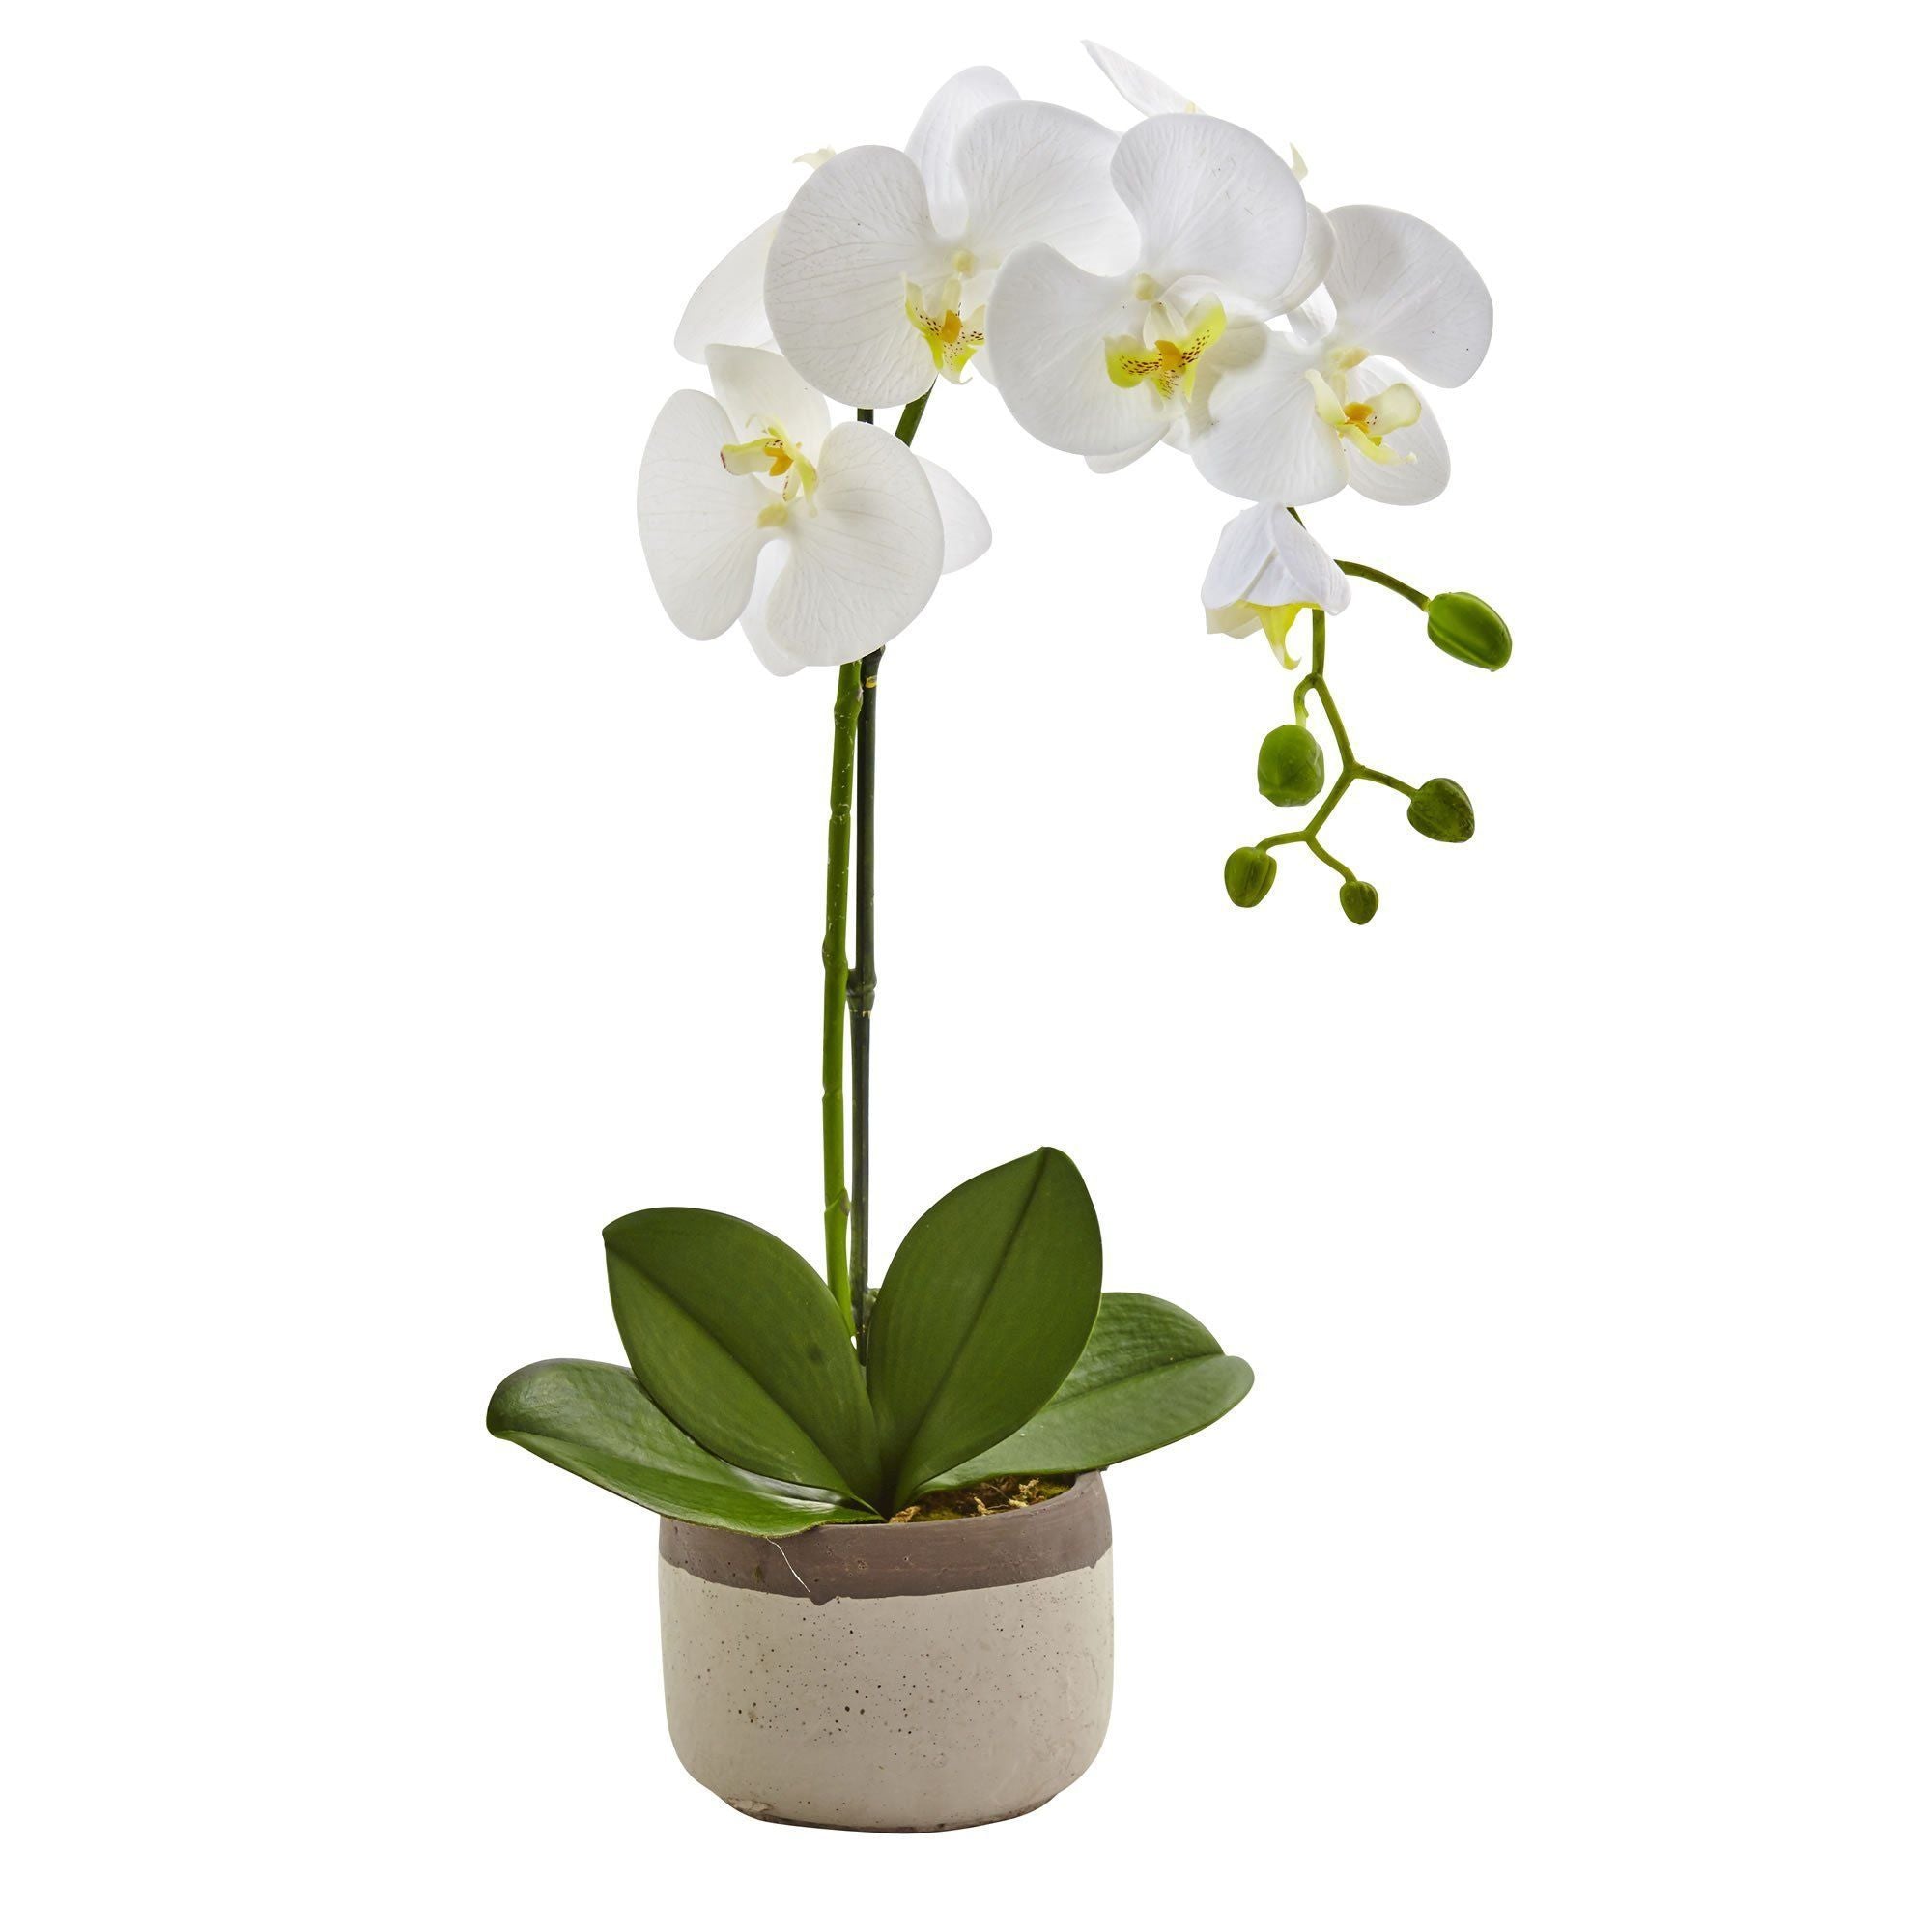 Image of Phalaenopsis Orchid in Ceramic Pot